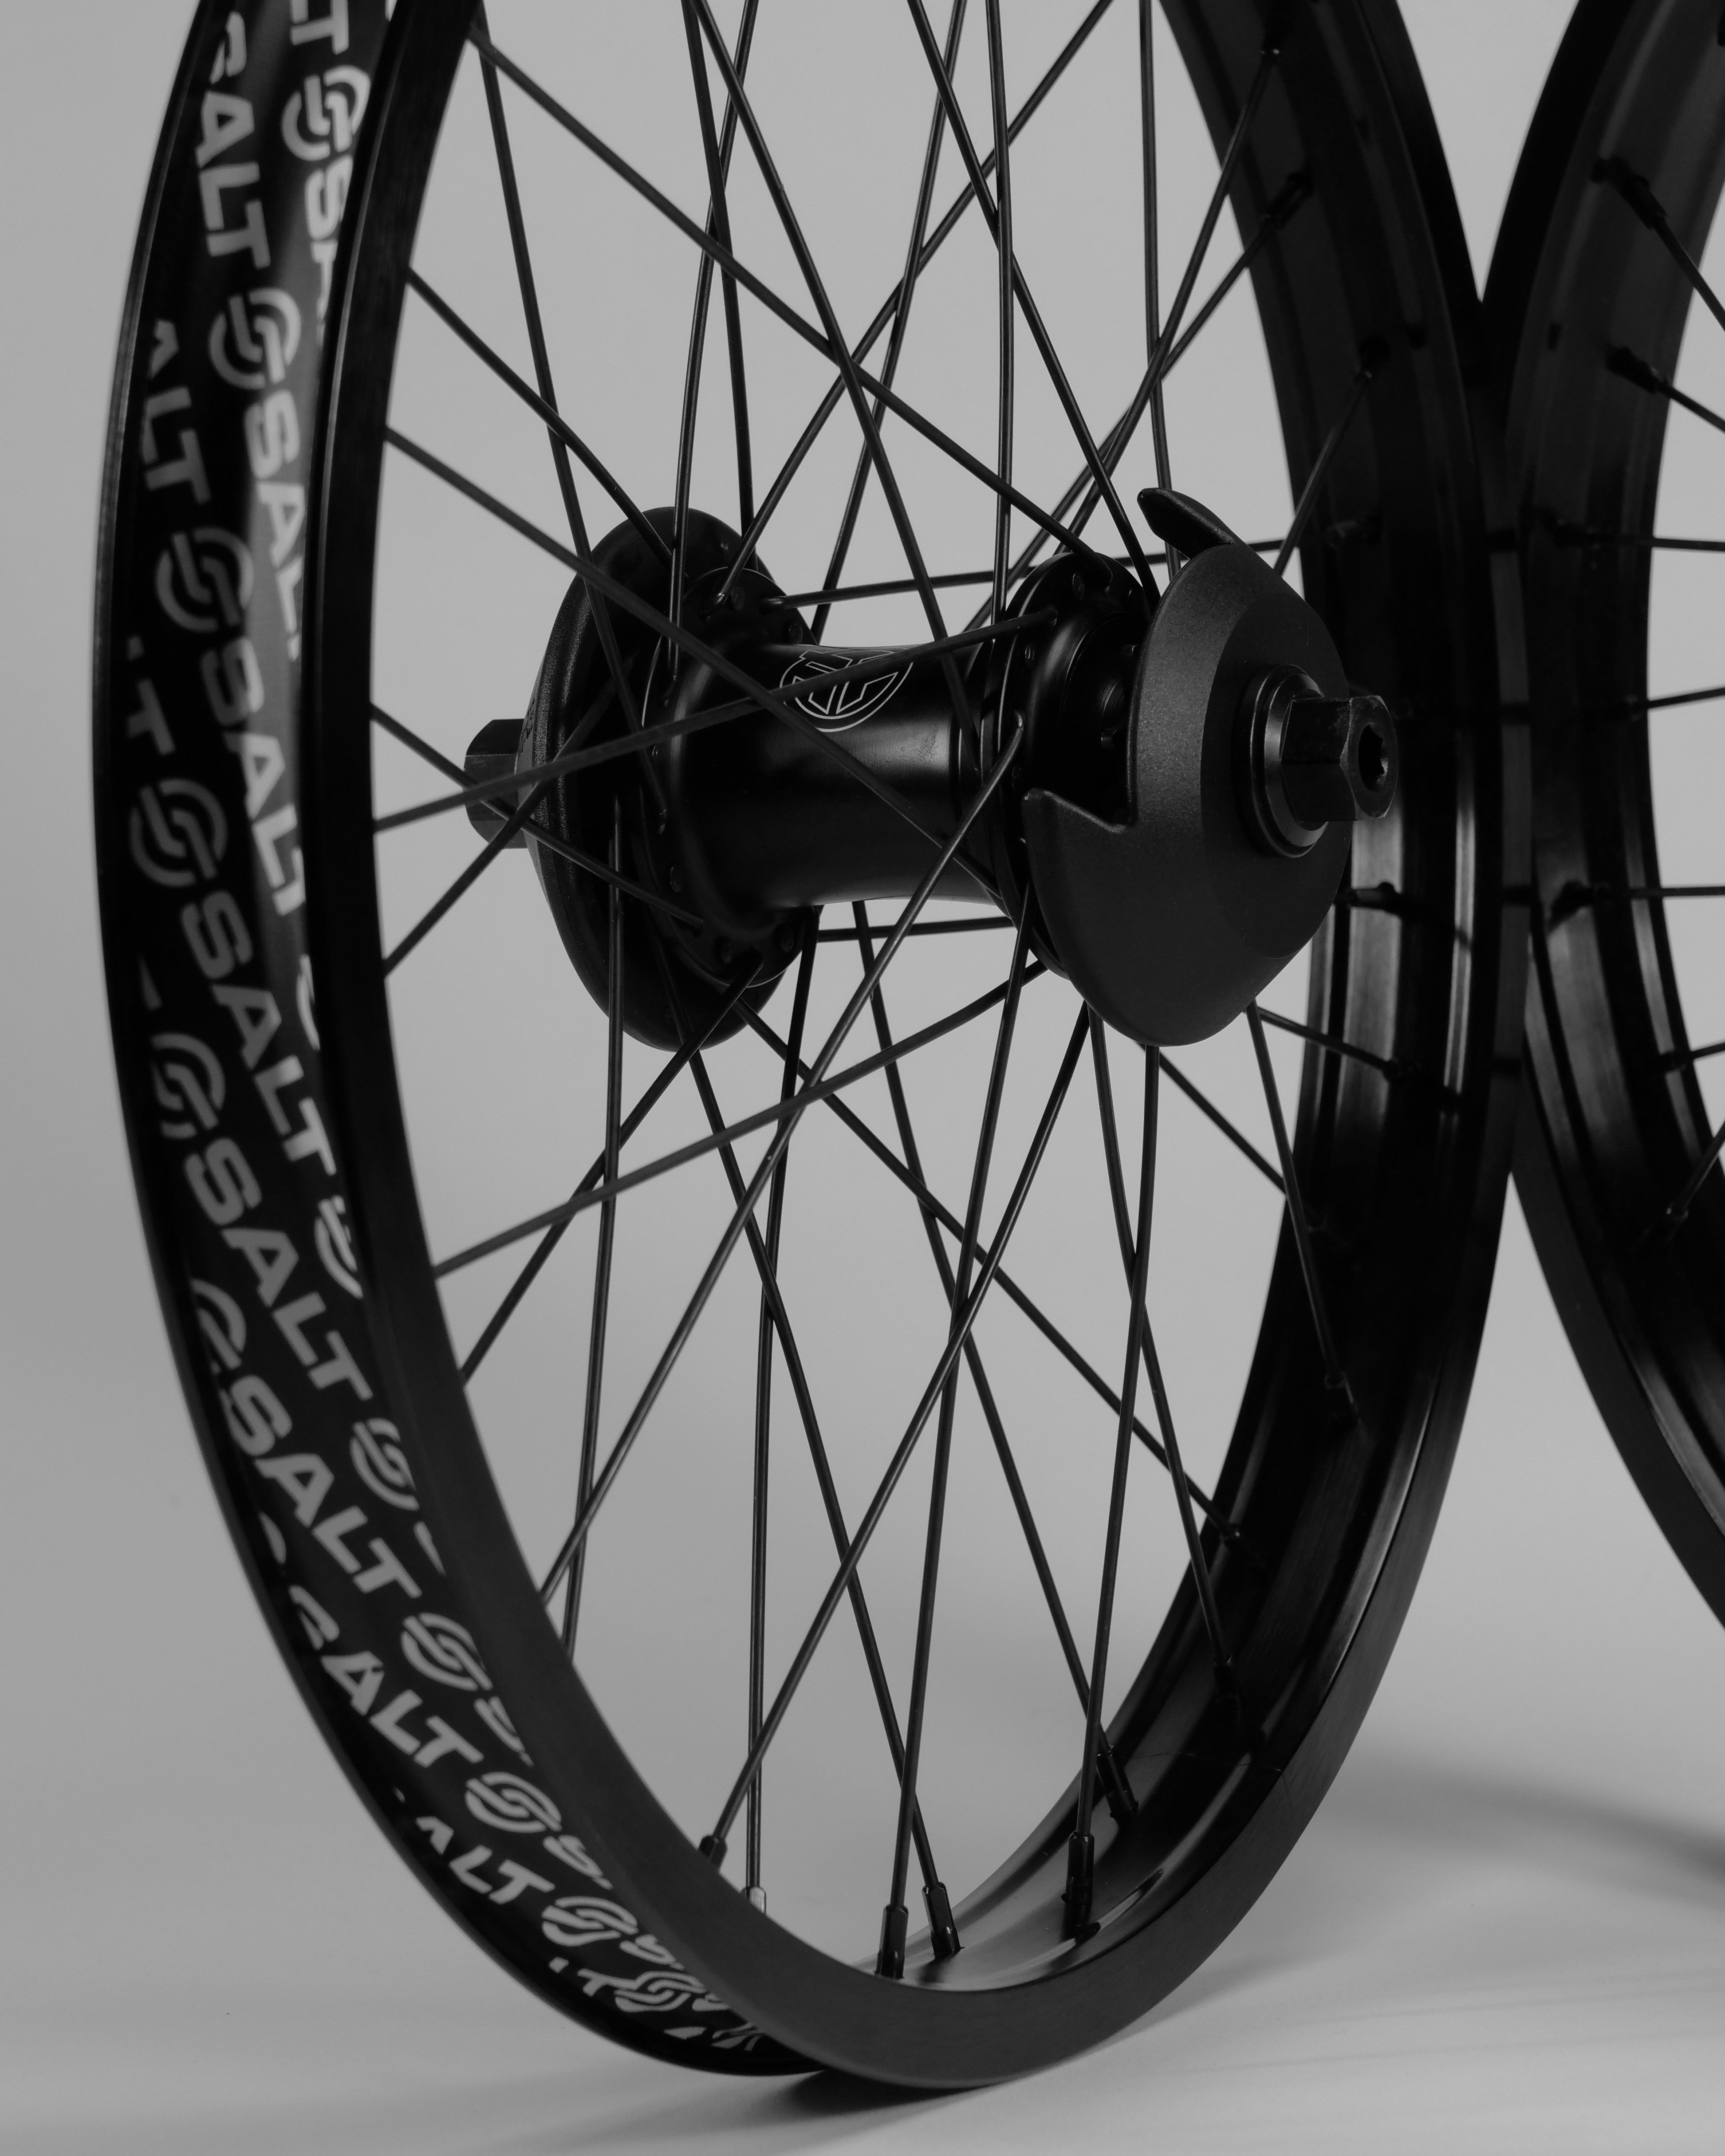 Two Federal Stance Pro x Alienation 18 Custom Wheelsets with intricate spokes and branded tire sidewalls, set against a plain background.